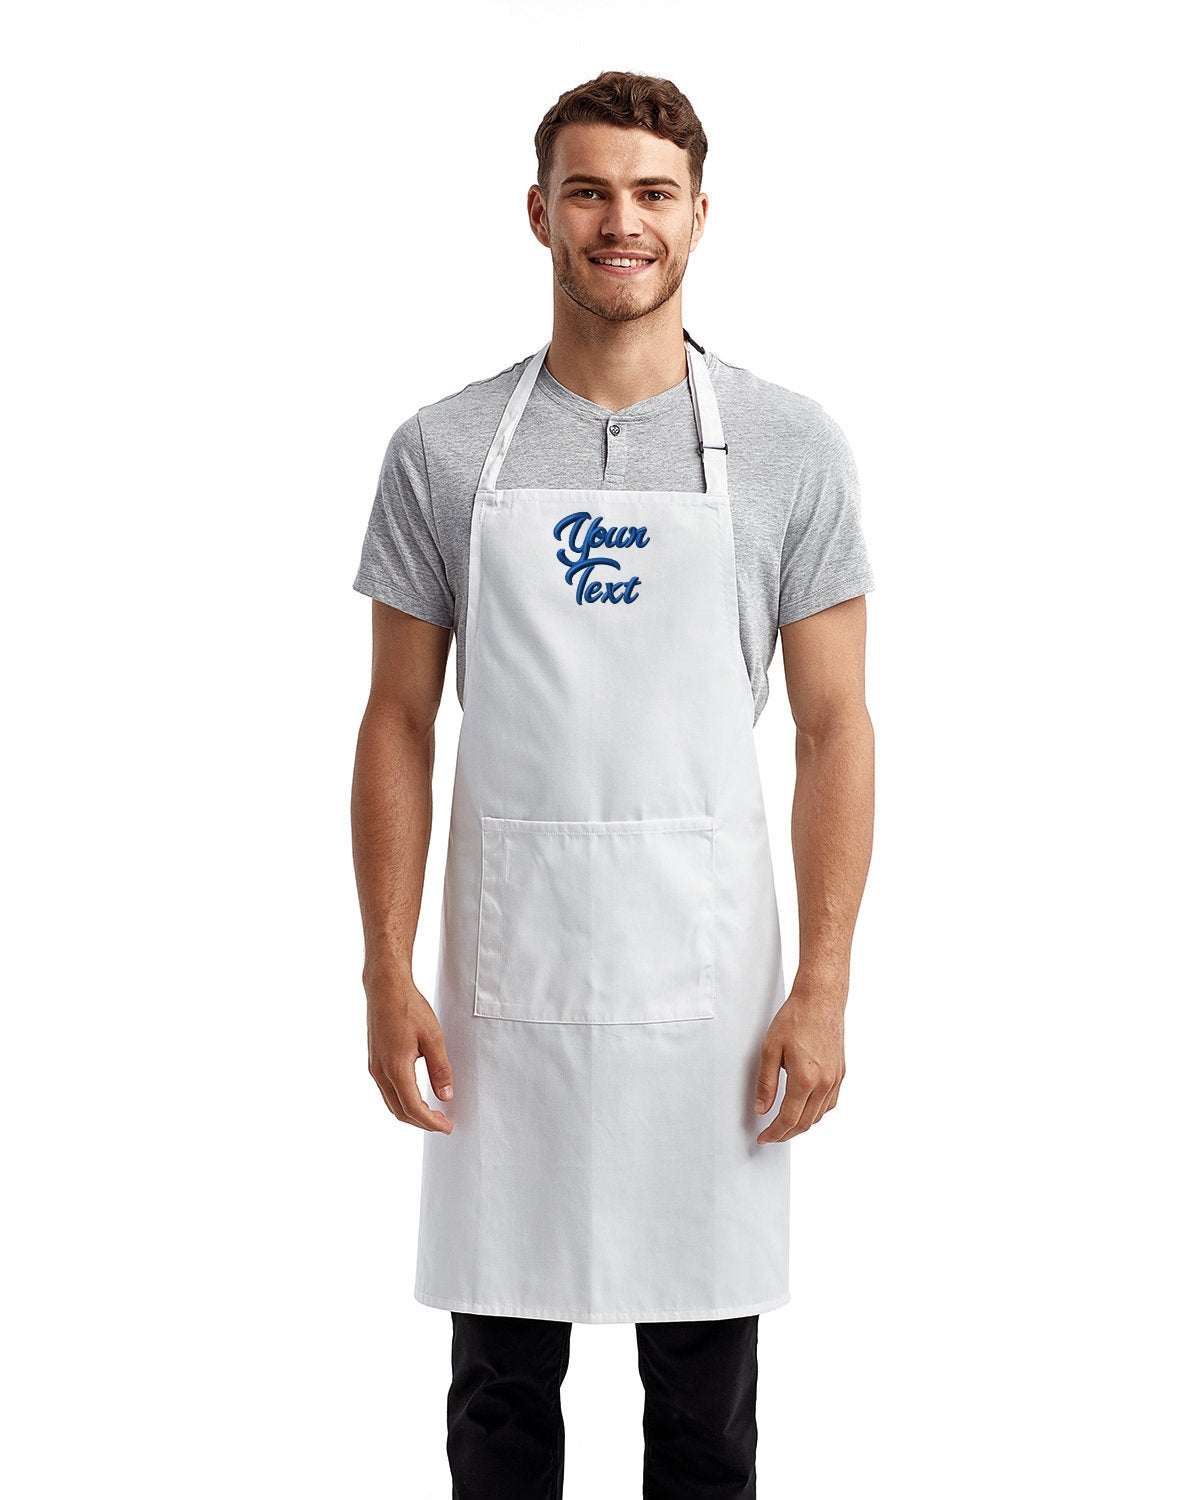 Restaurant Aprons with Your Company Name Embroidered - 3 Pack